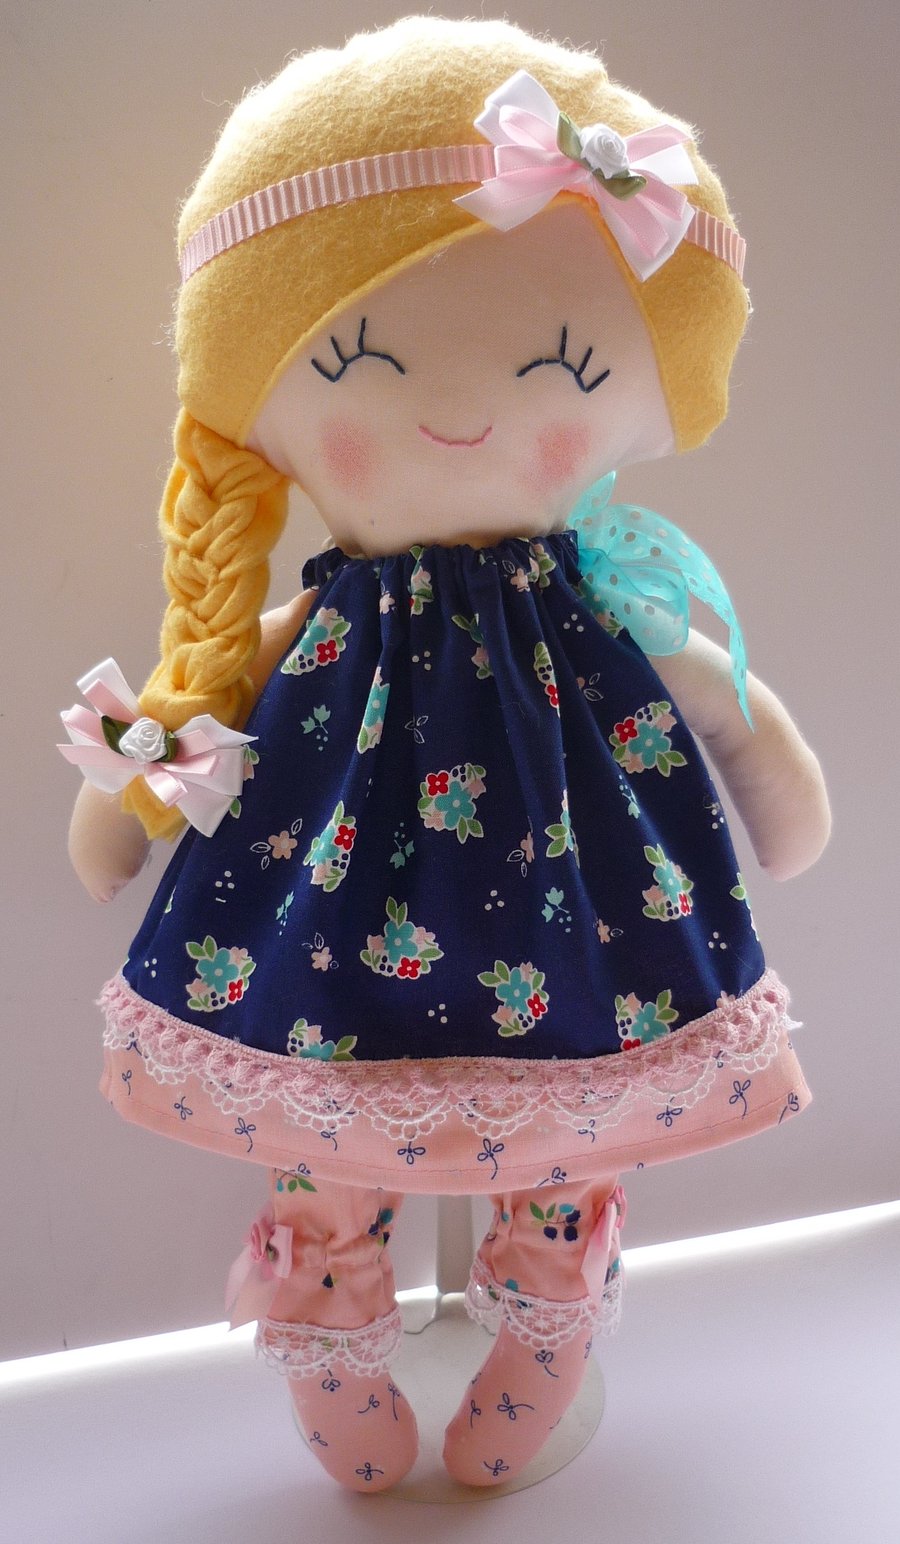 Handmade Large Rag Doll in Dress and Bloomers